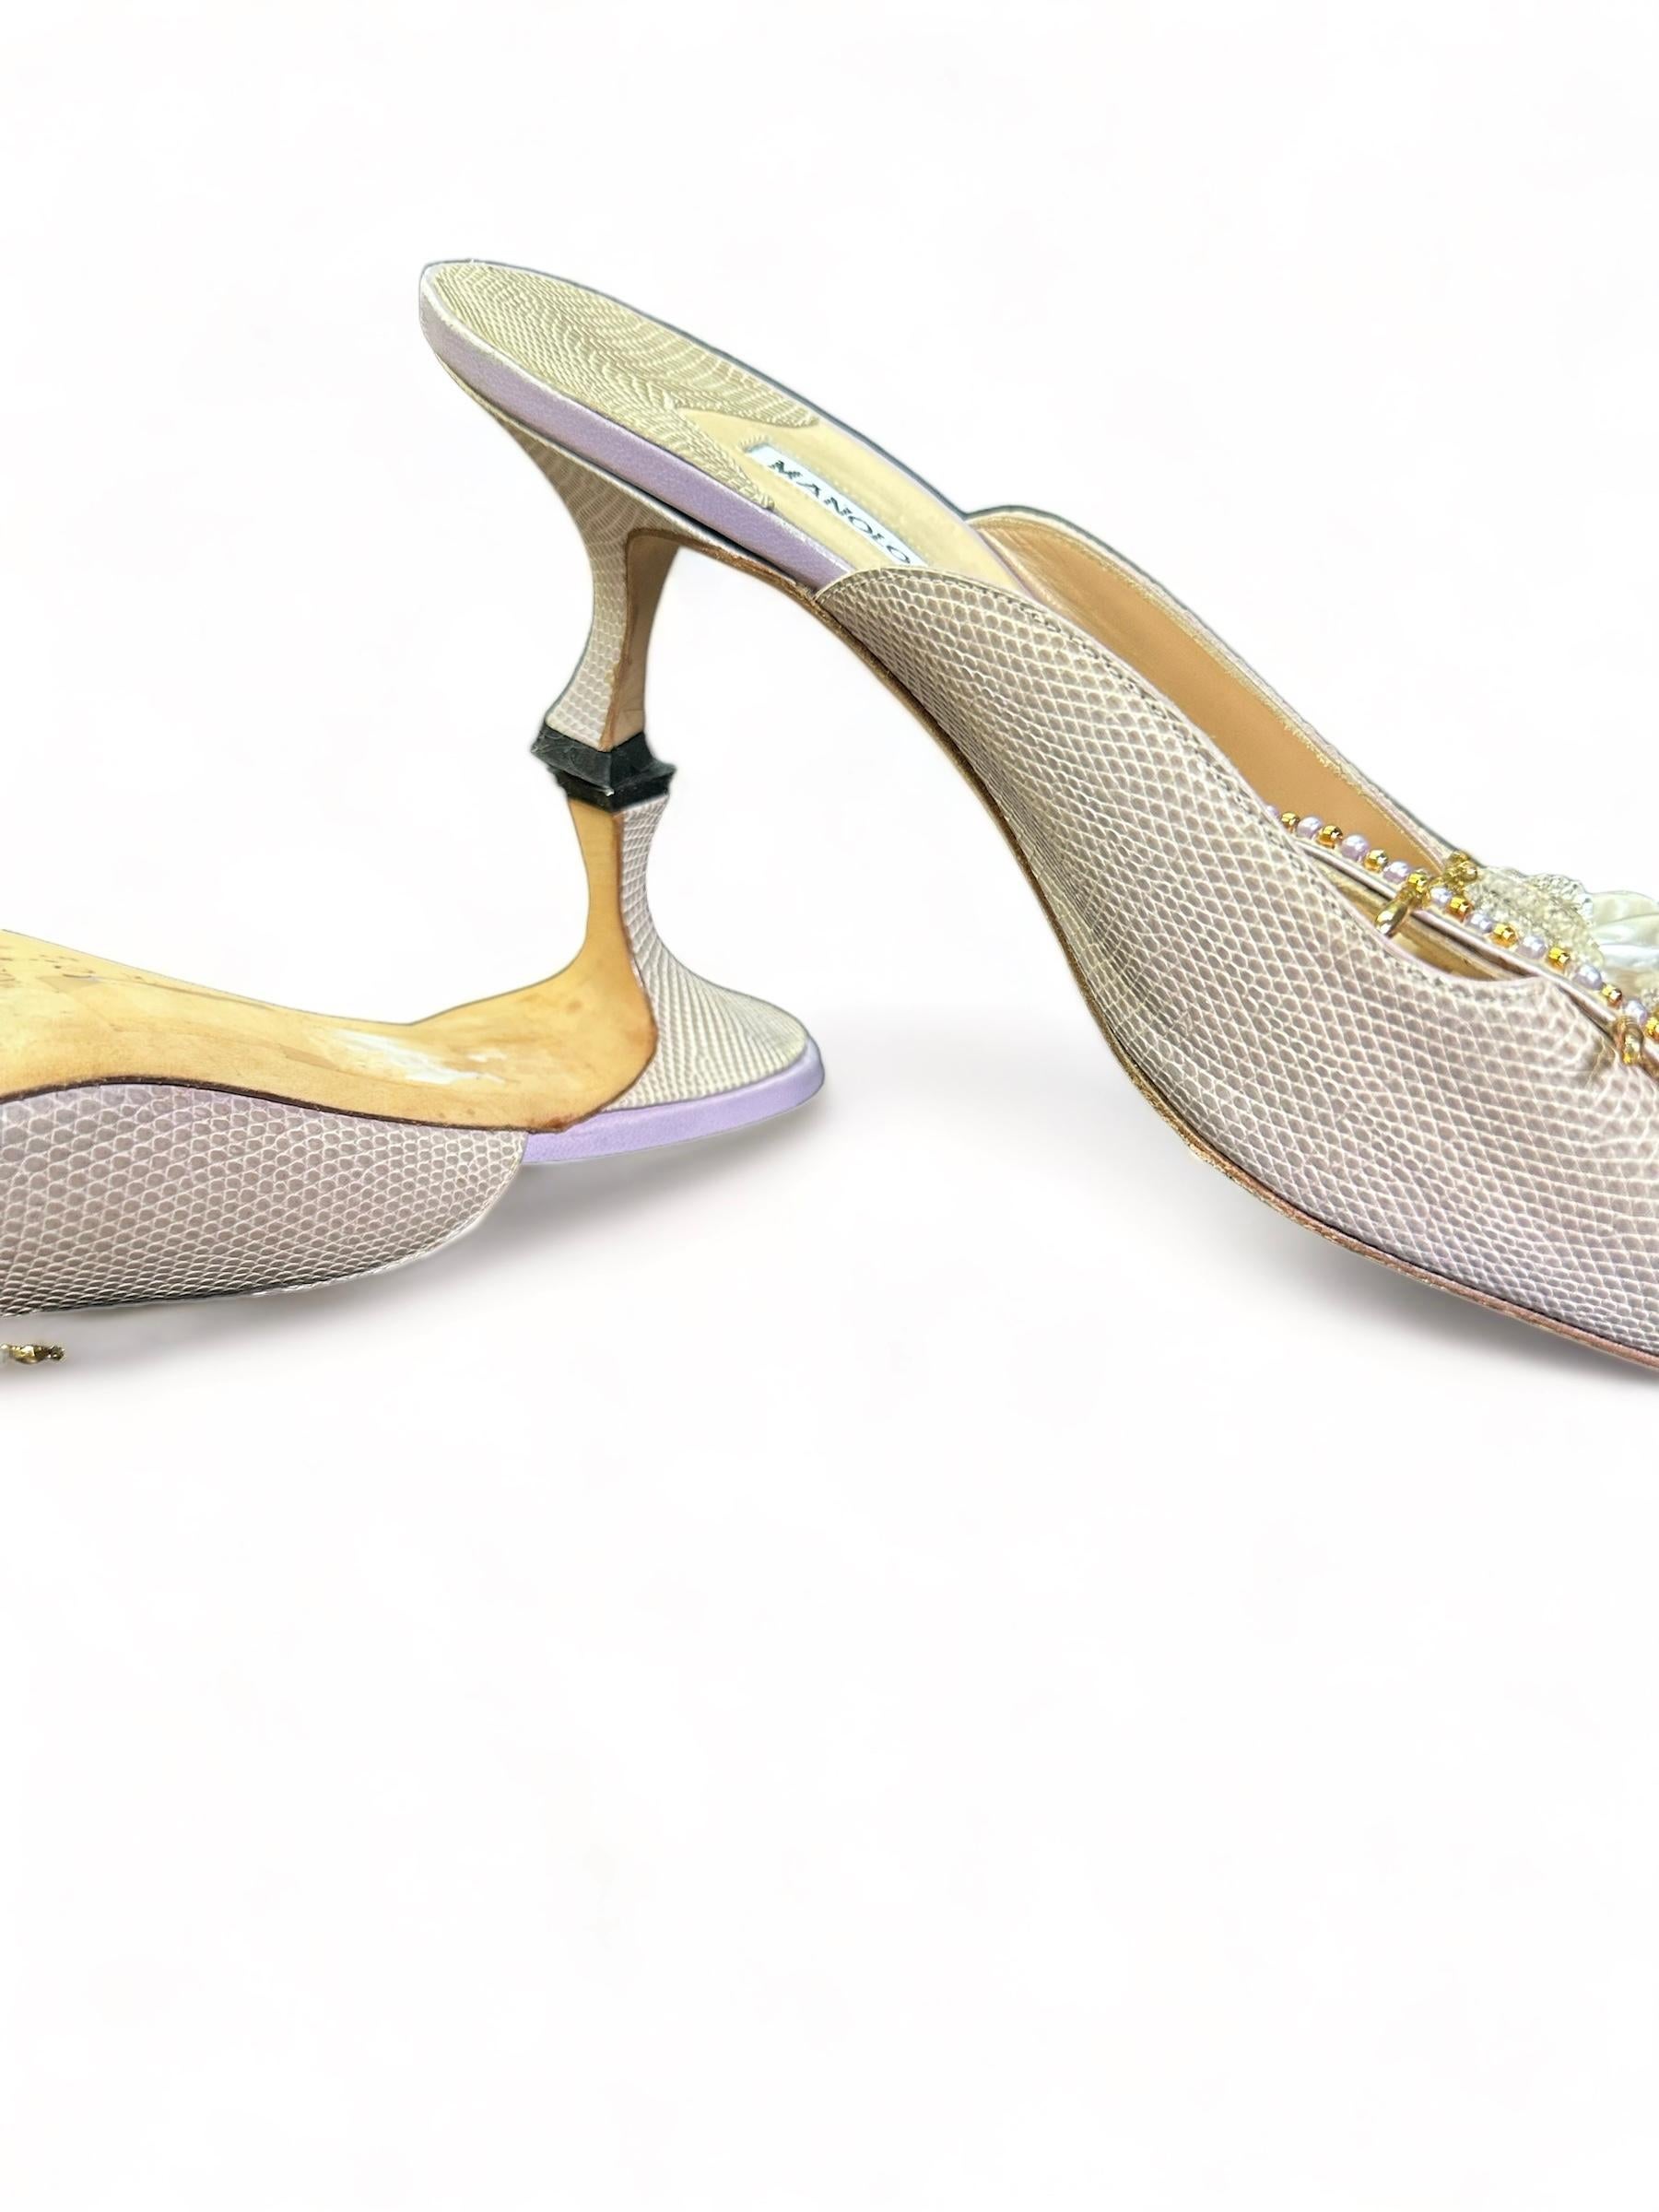 Late 1990's Manolo Blahnik Orientalia Pale Lavender Lizard Embossed Mules; Embellished with Faux Baroque Pearls, Seed Beads and Crystals. Minimal Wear. Size 40 1/2. US 10.5